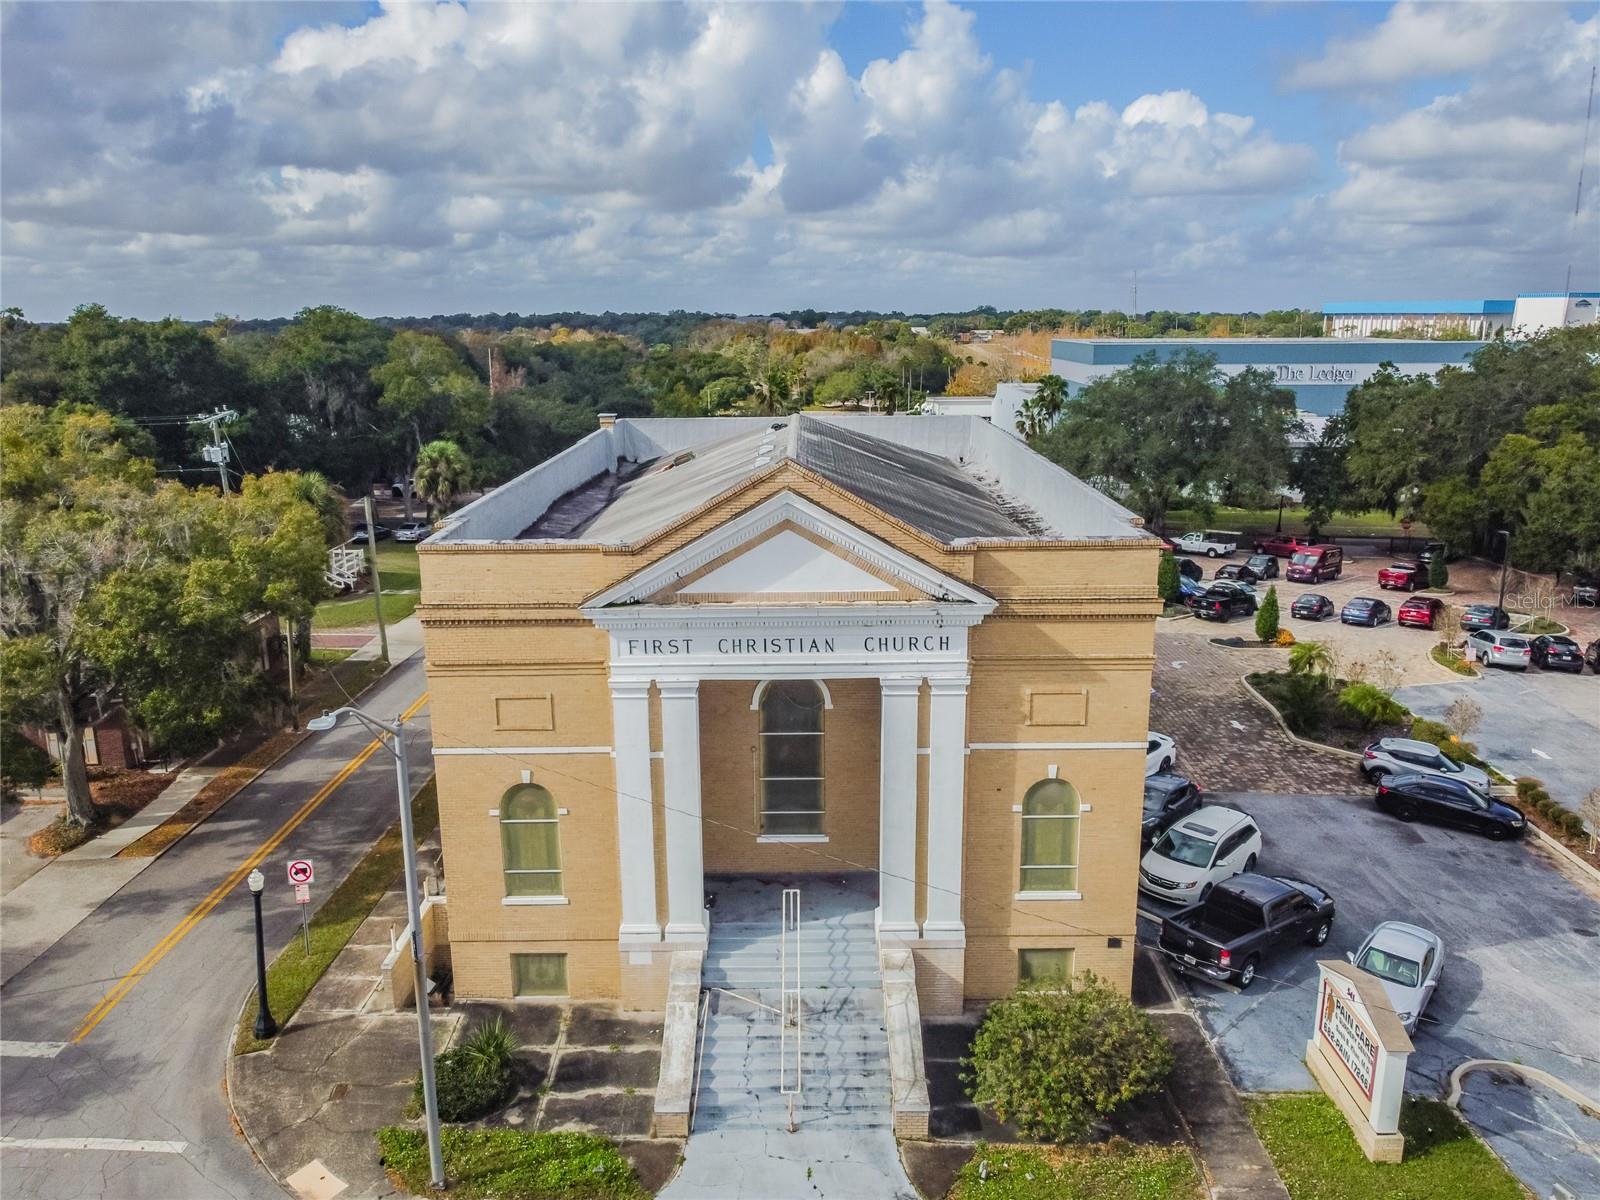 Church Building For Sale in Lakeland, FL - 23,700 sq ft